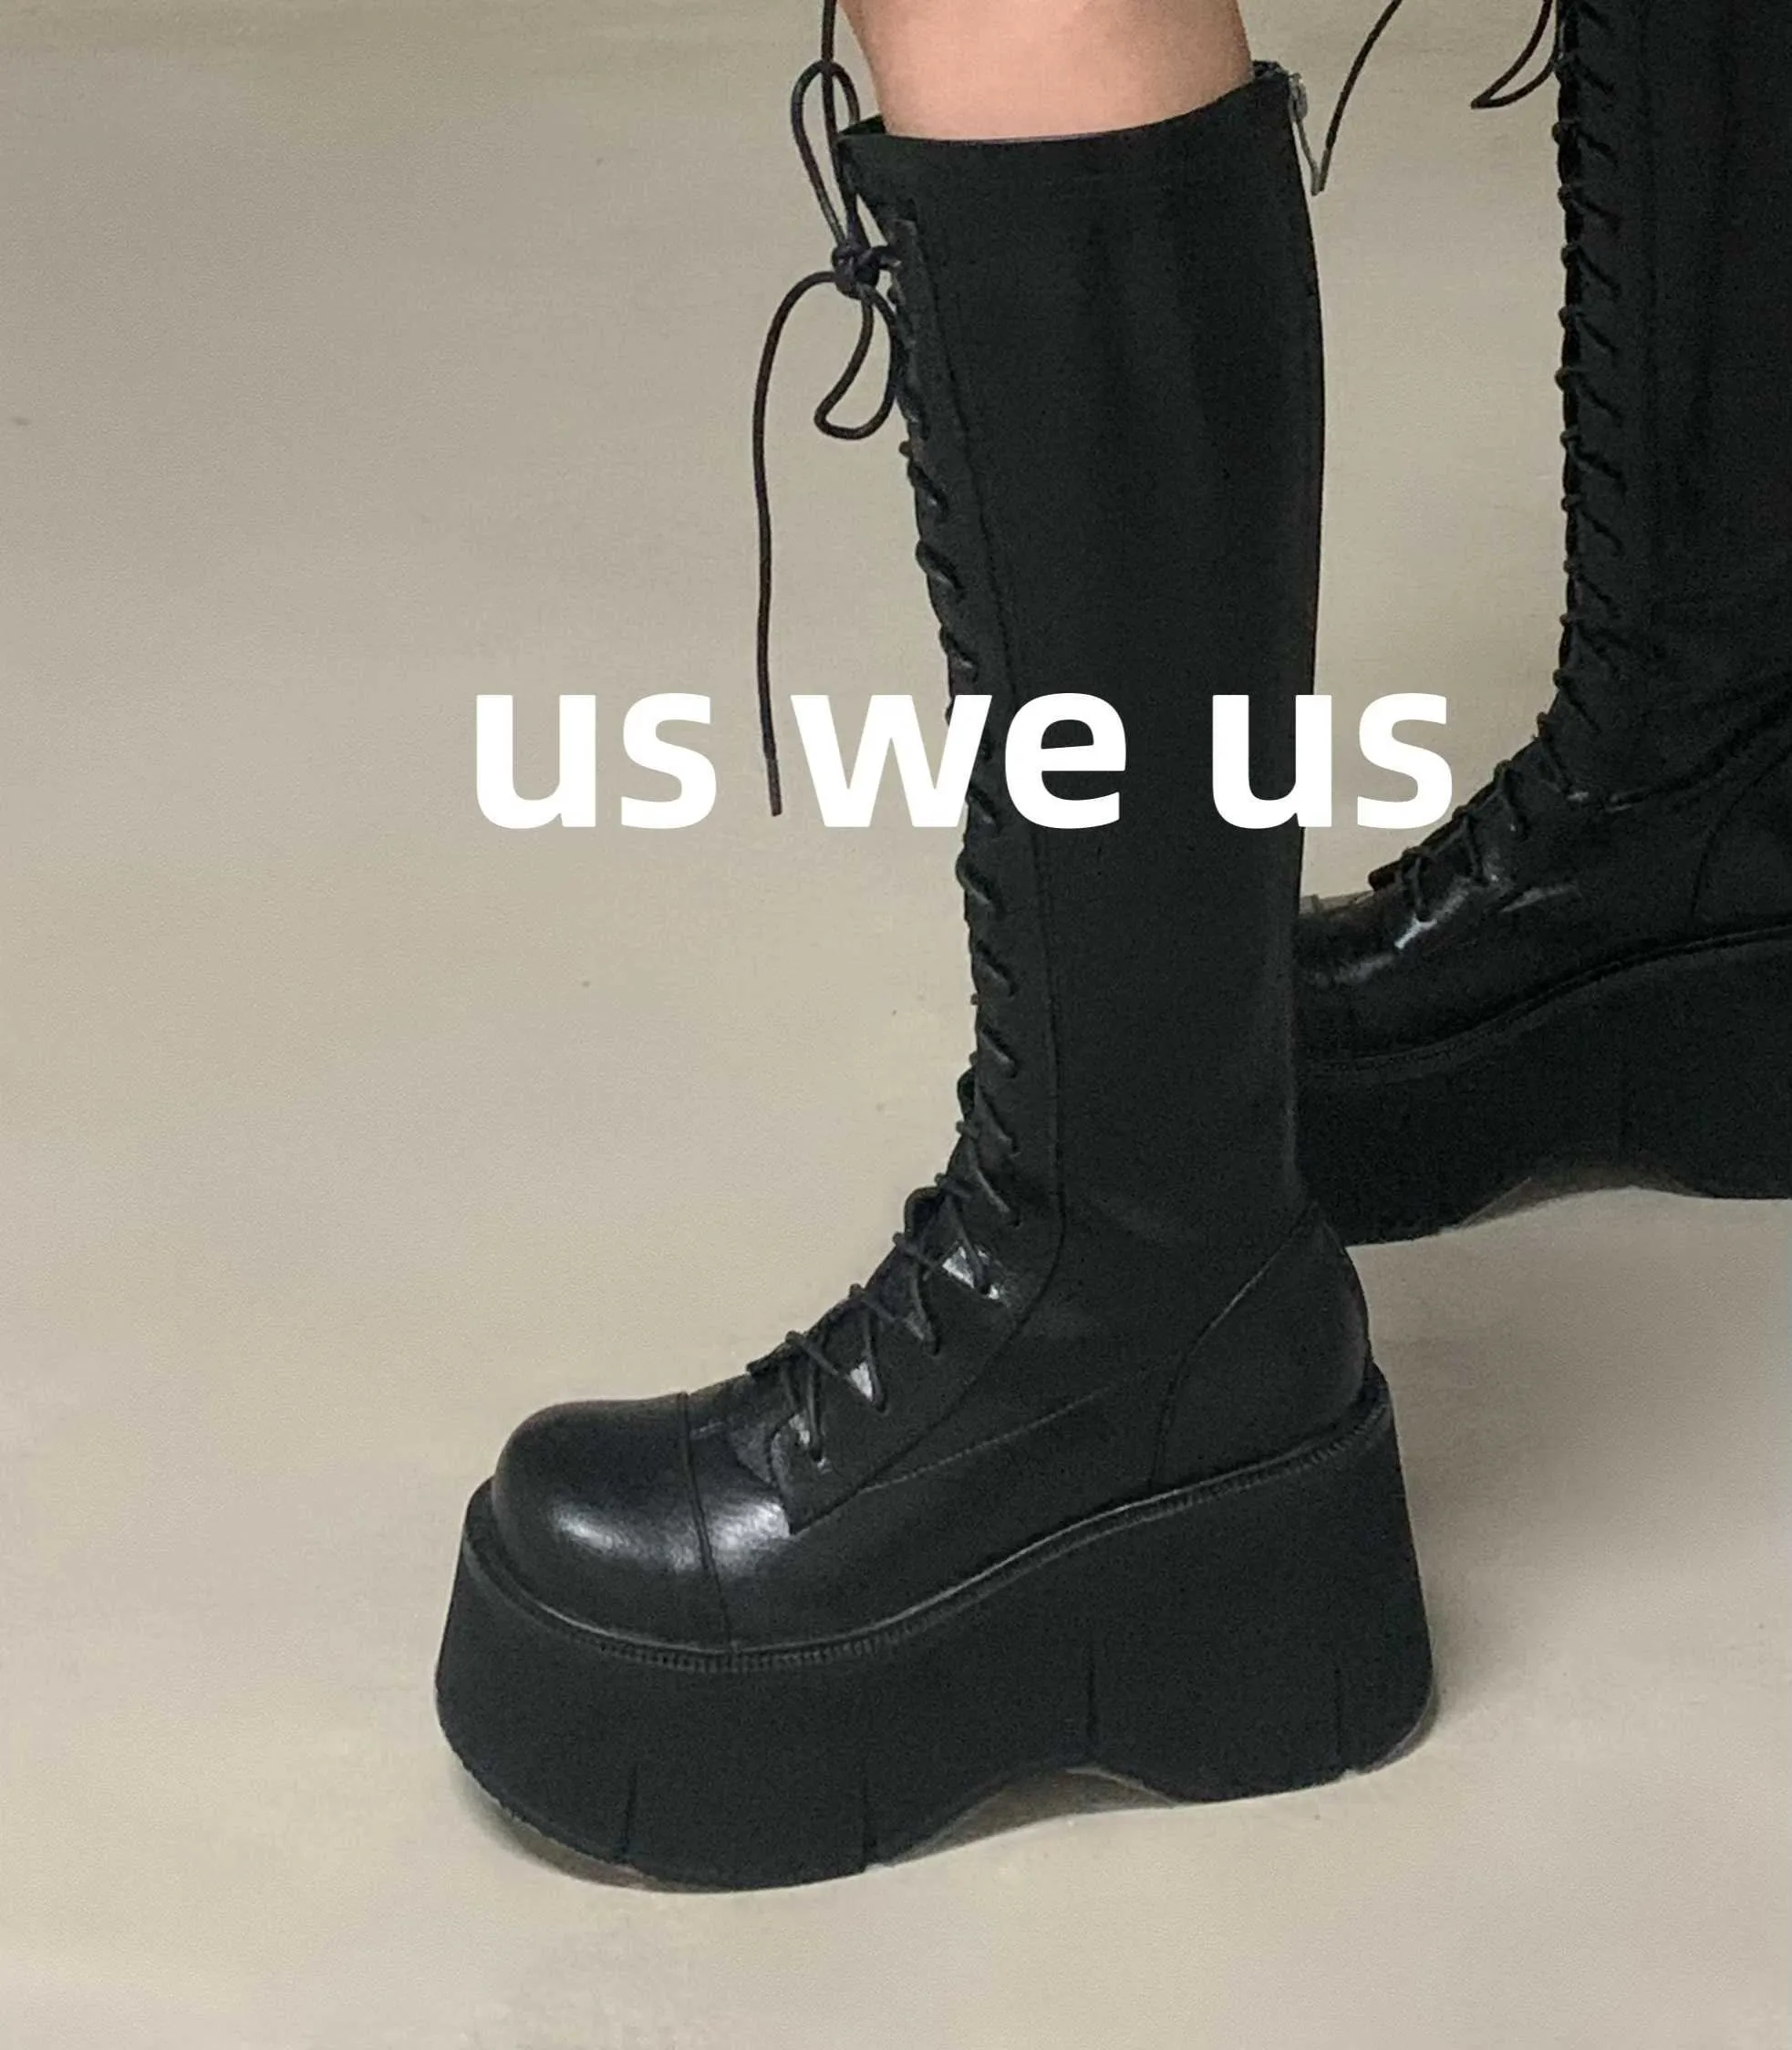 Boots Goth Women Platform Wedges Heeled Motorcycle Boots Lace Up Zip Combat Knee High Boots Autumn Winter Design Shoes Z0605